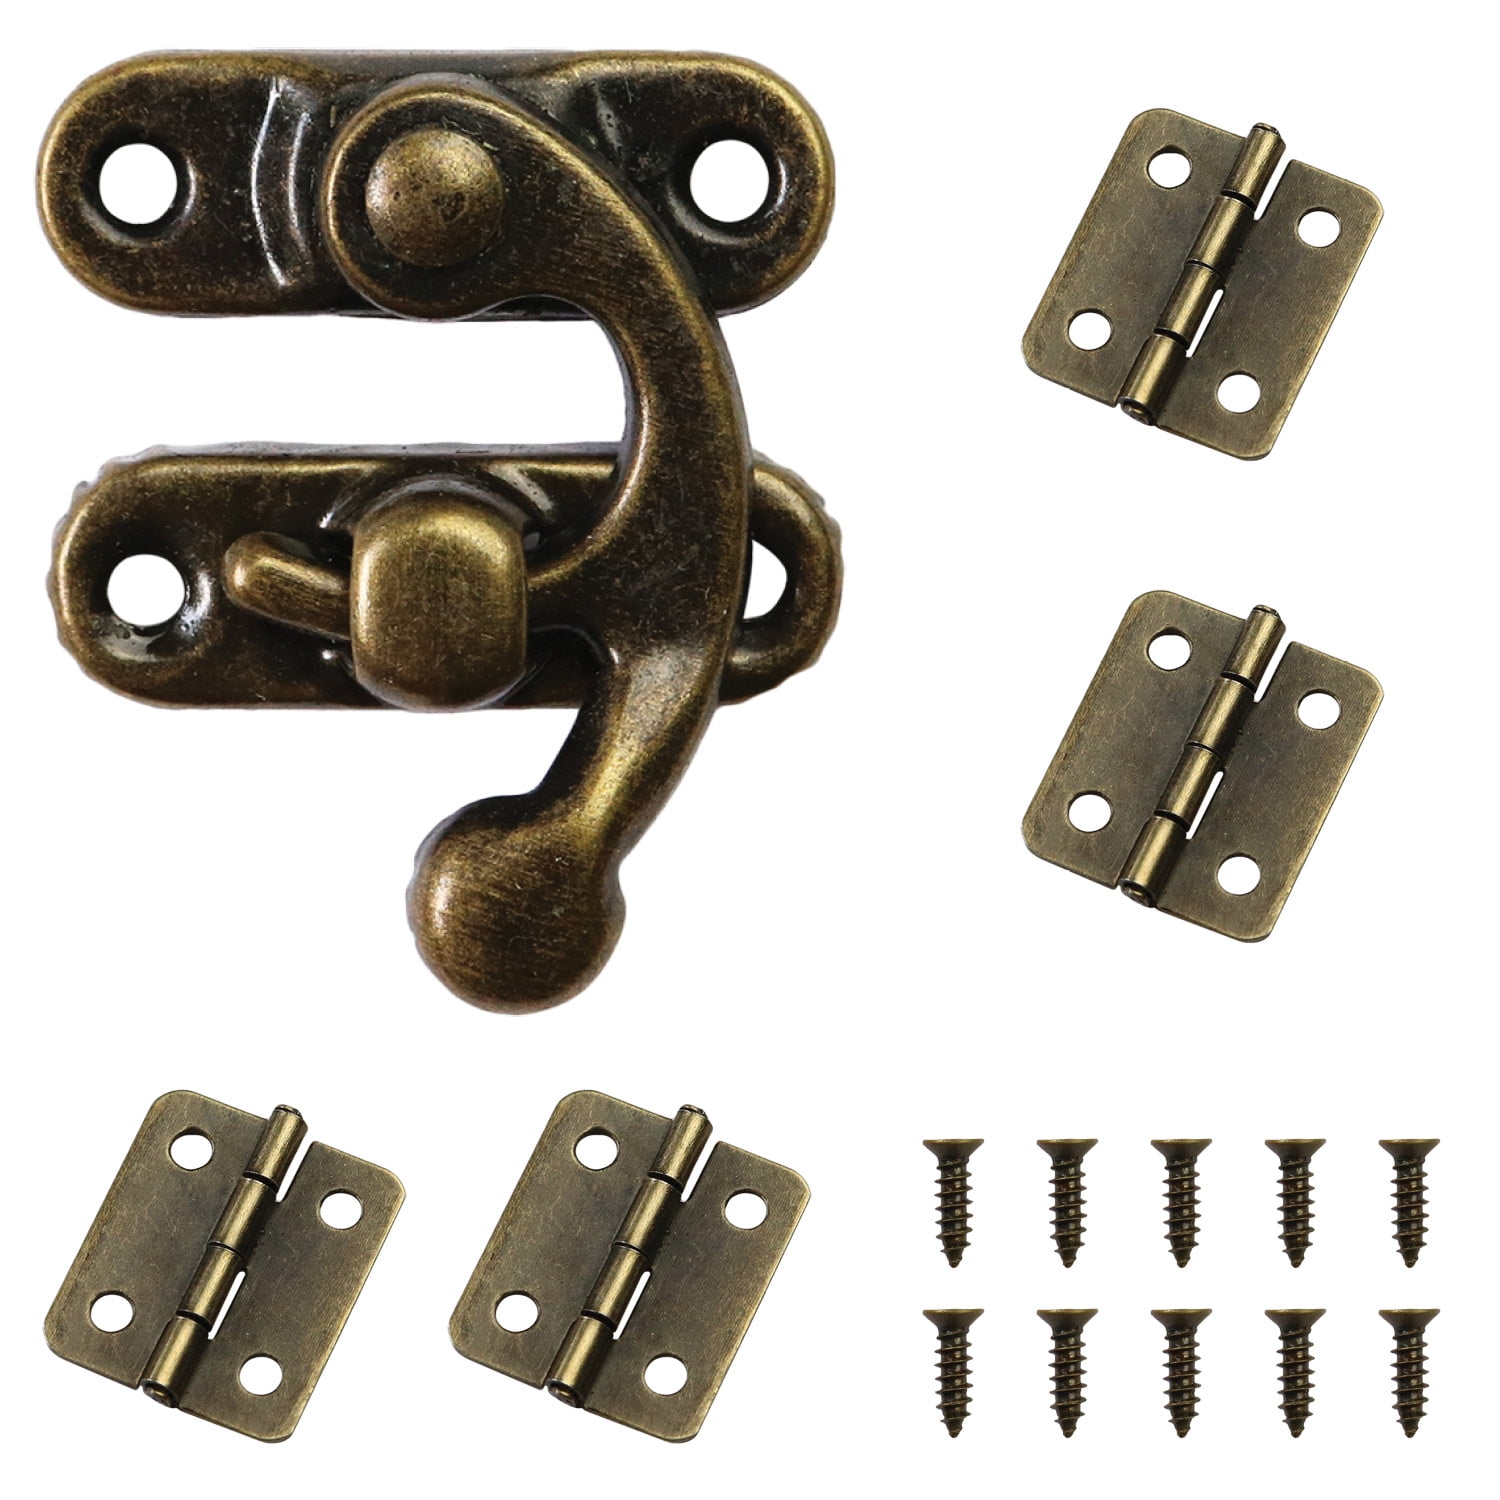 PGMJ 40 Pieces Bronze Tone Antique Right Latch Hook Hasp Horn Lock Wood Jewelry Box Latch Hook Clasp and 160 Replacement Screws Right Latch Buckle